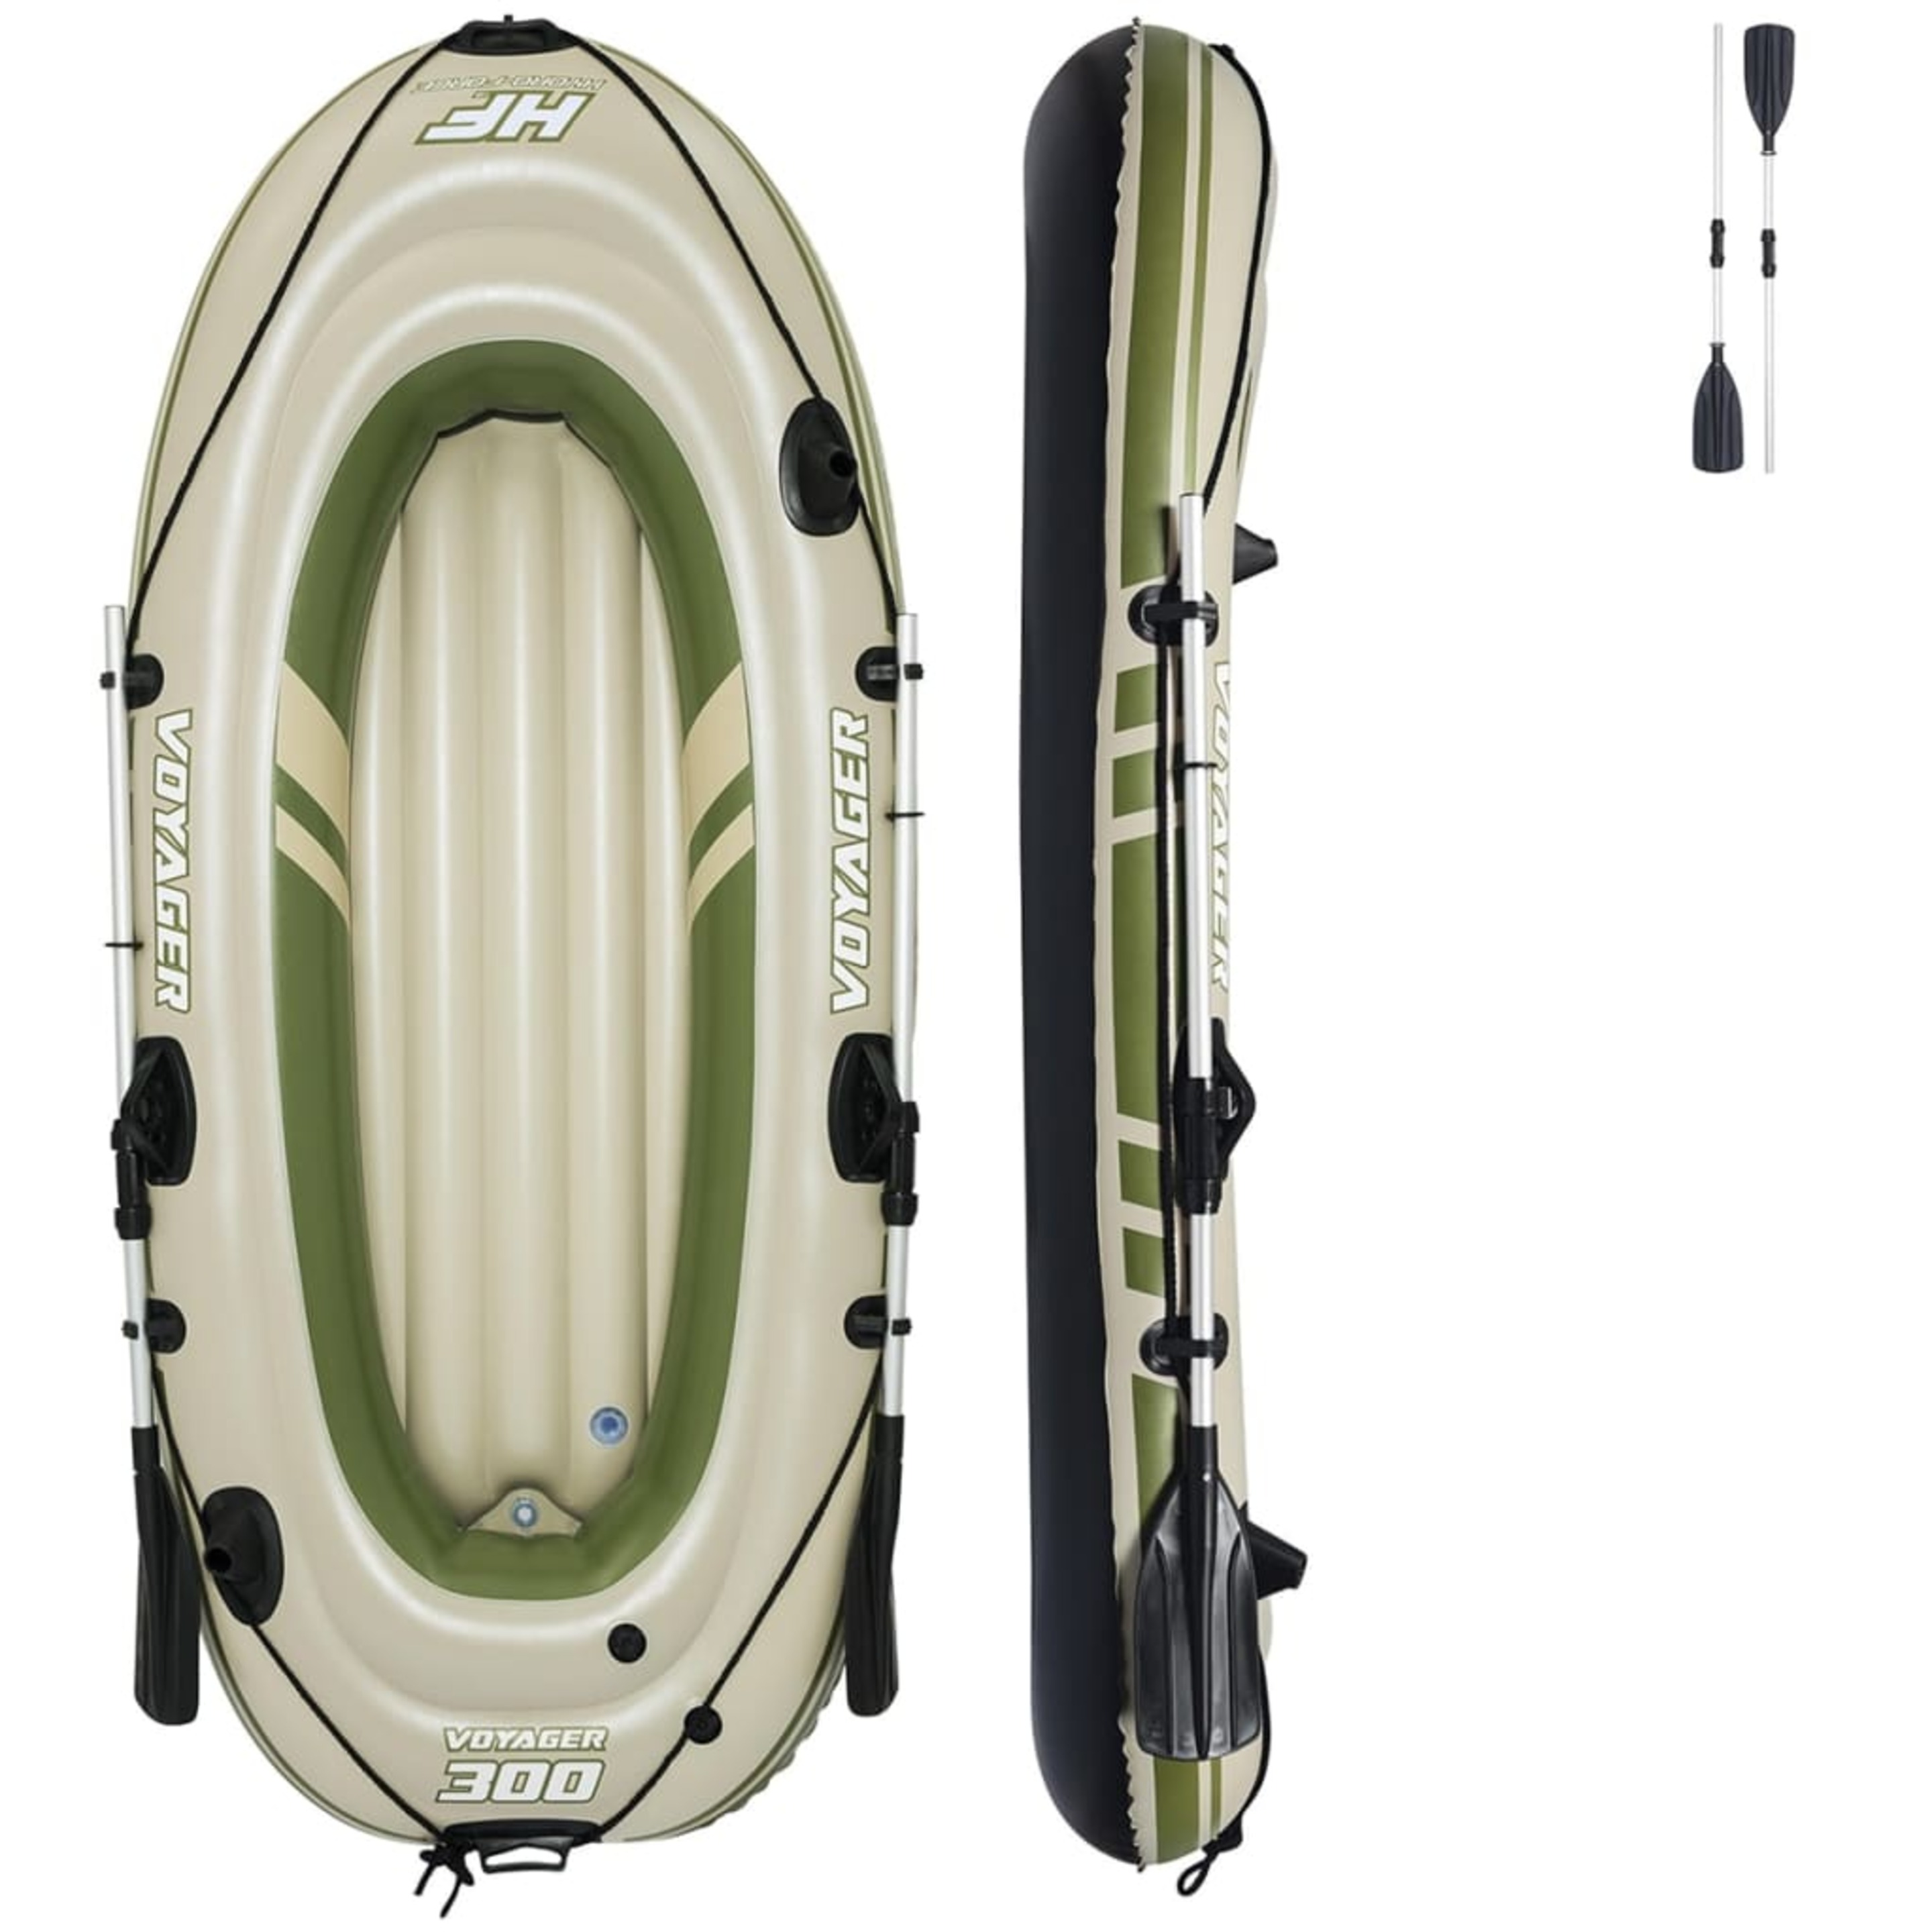 Bestway Barco De Pesca Inflable Hydro-force Voyager 300